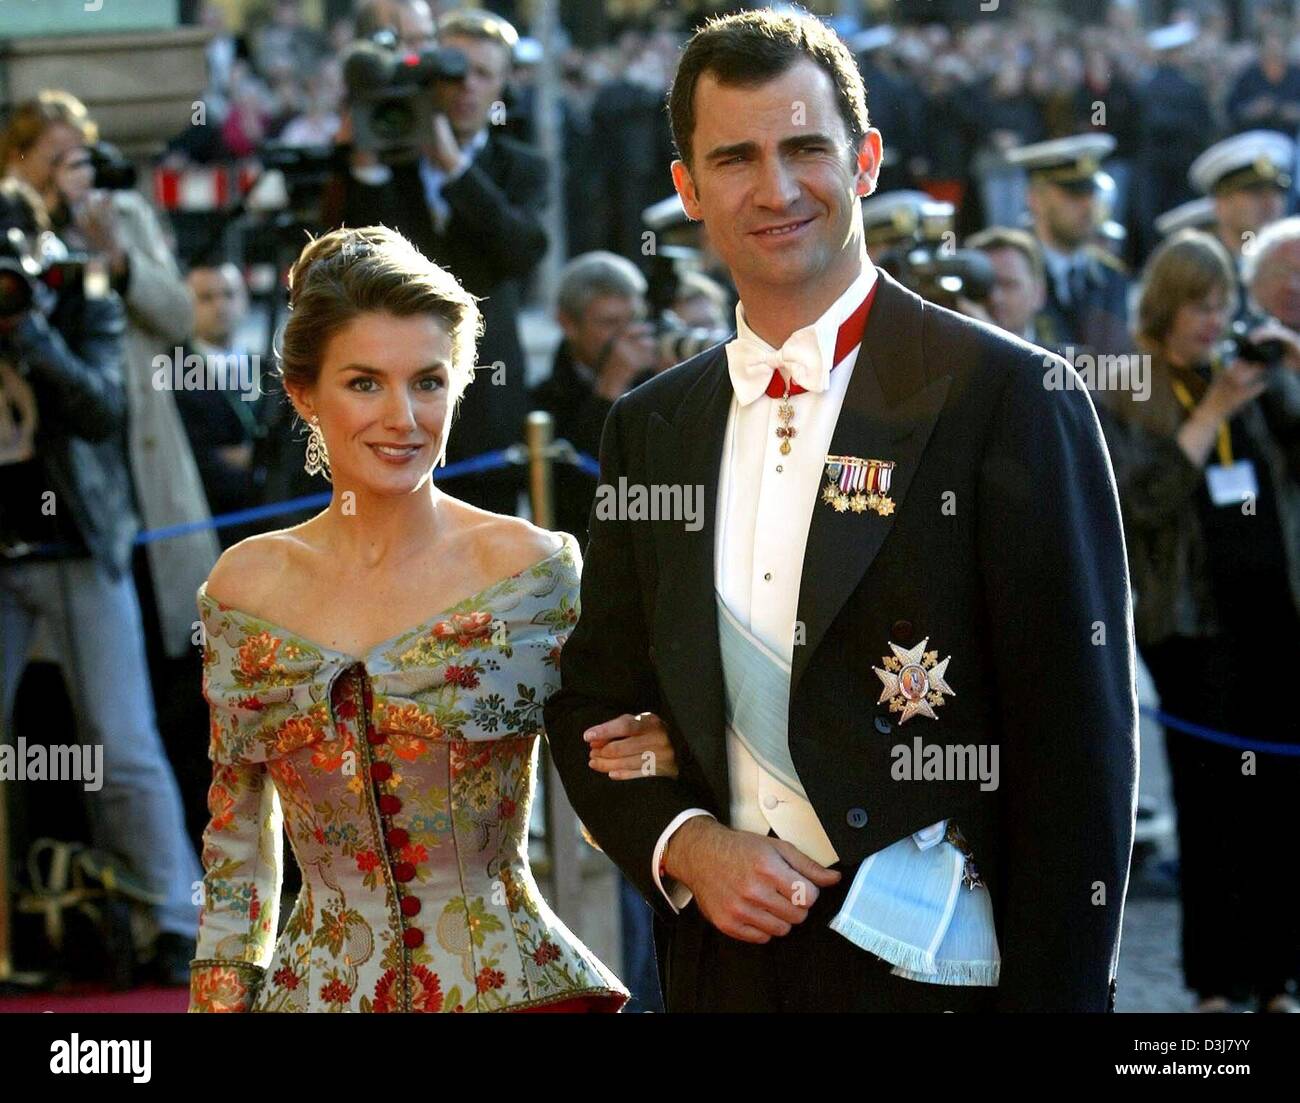 (dpa) - On the eve of the wedding of Crown Prince Frederik of Denmark and Mary Donaldson, Crown Prince Felipe of Spain and his fiancee Letizia Ortiz arrive for a gala at the Royal Theatre in Copenhagen, Denmark, 13 May 2004. Stock Photo